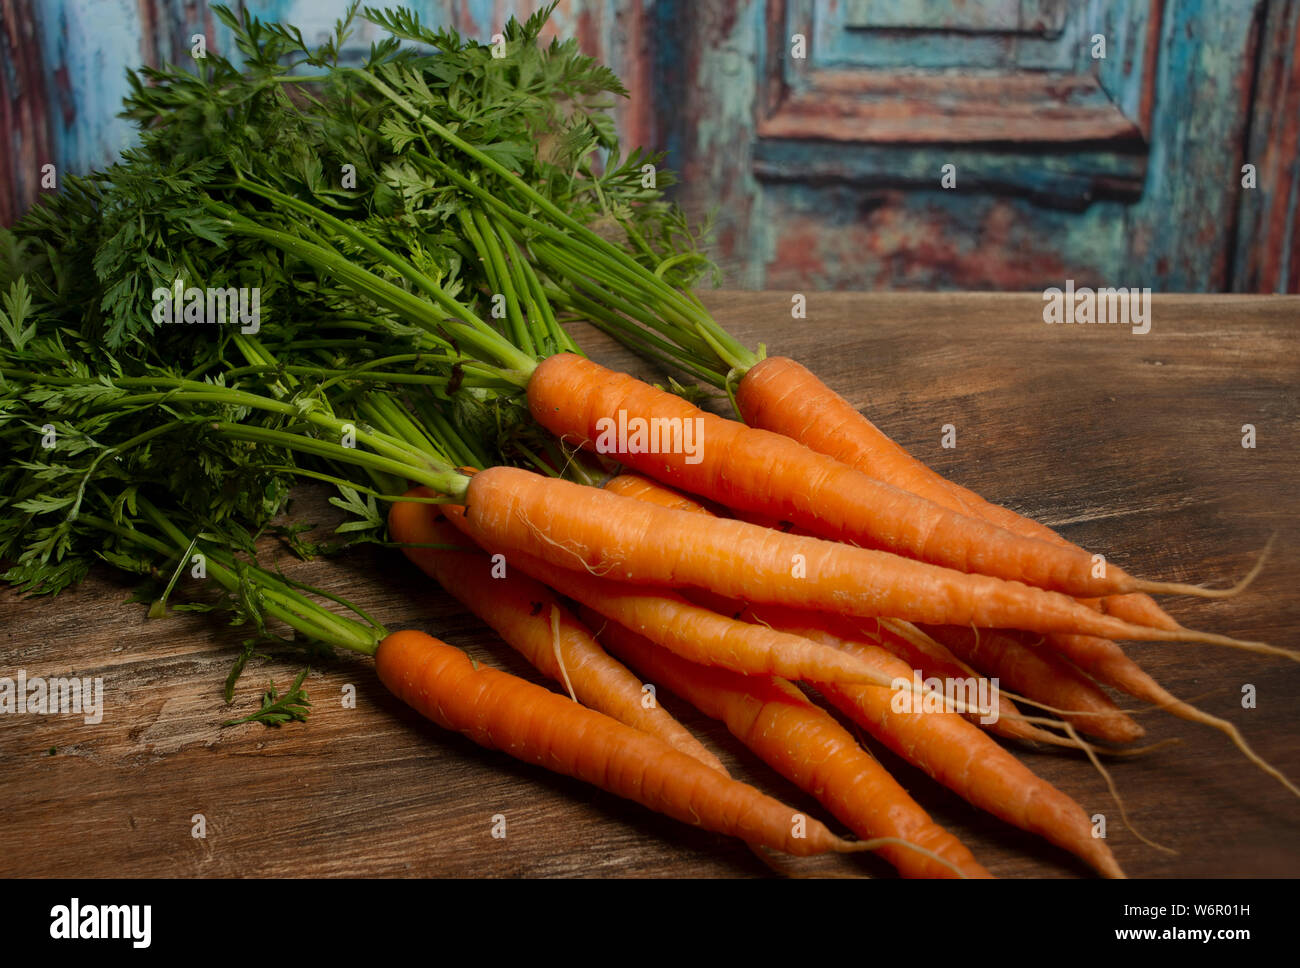 Freshly pulled juicy carrots from the farmhouse cottage garden. Stock Photo